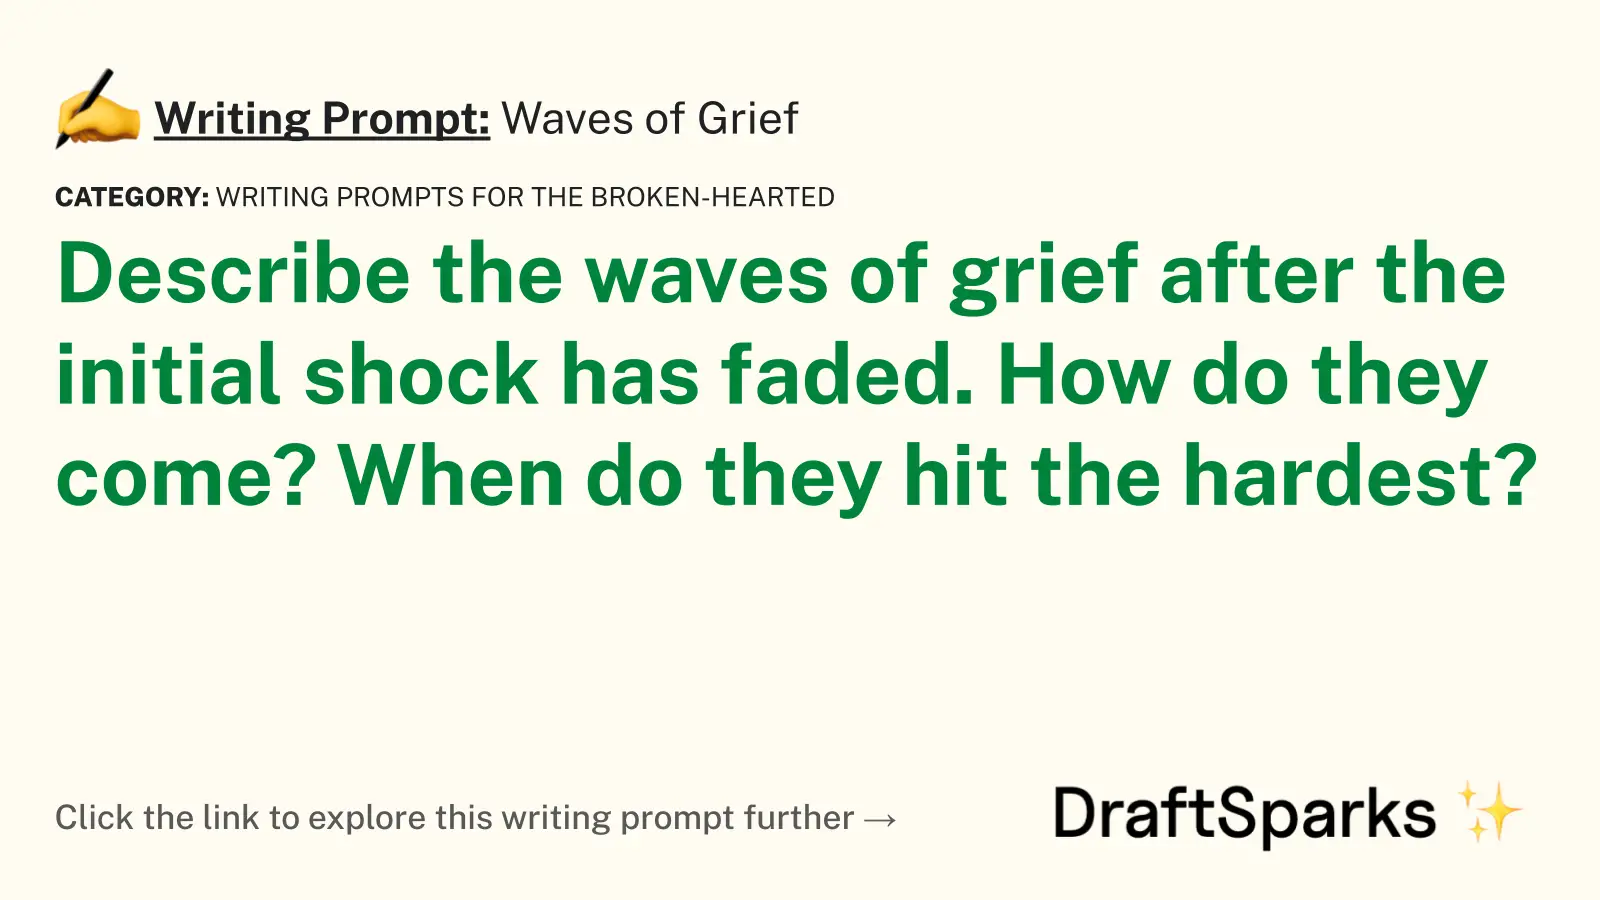 Waves of Grief